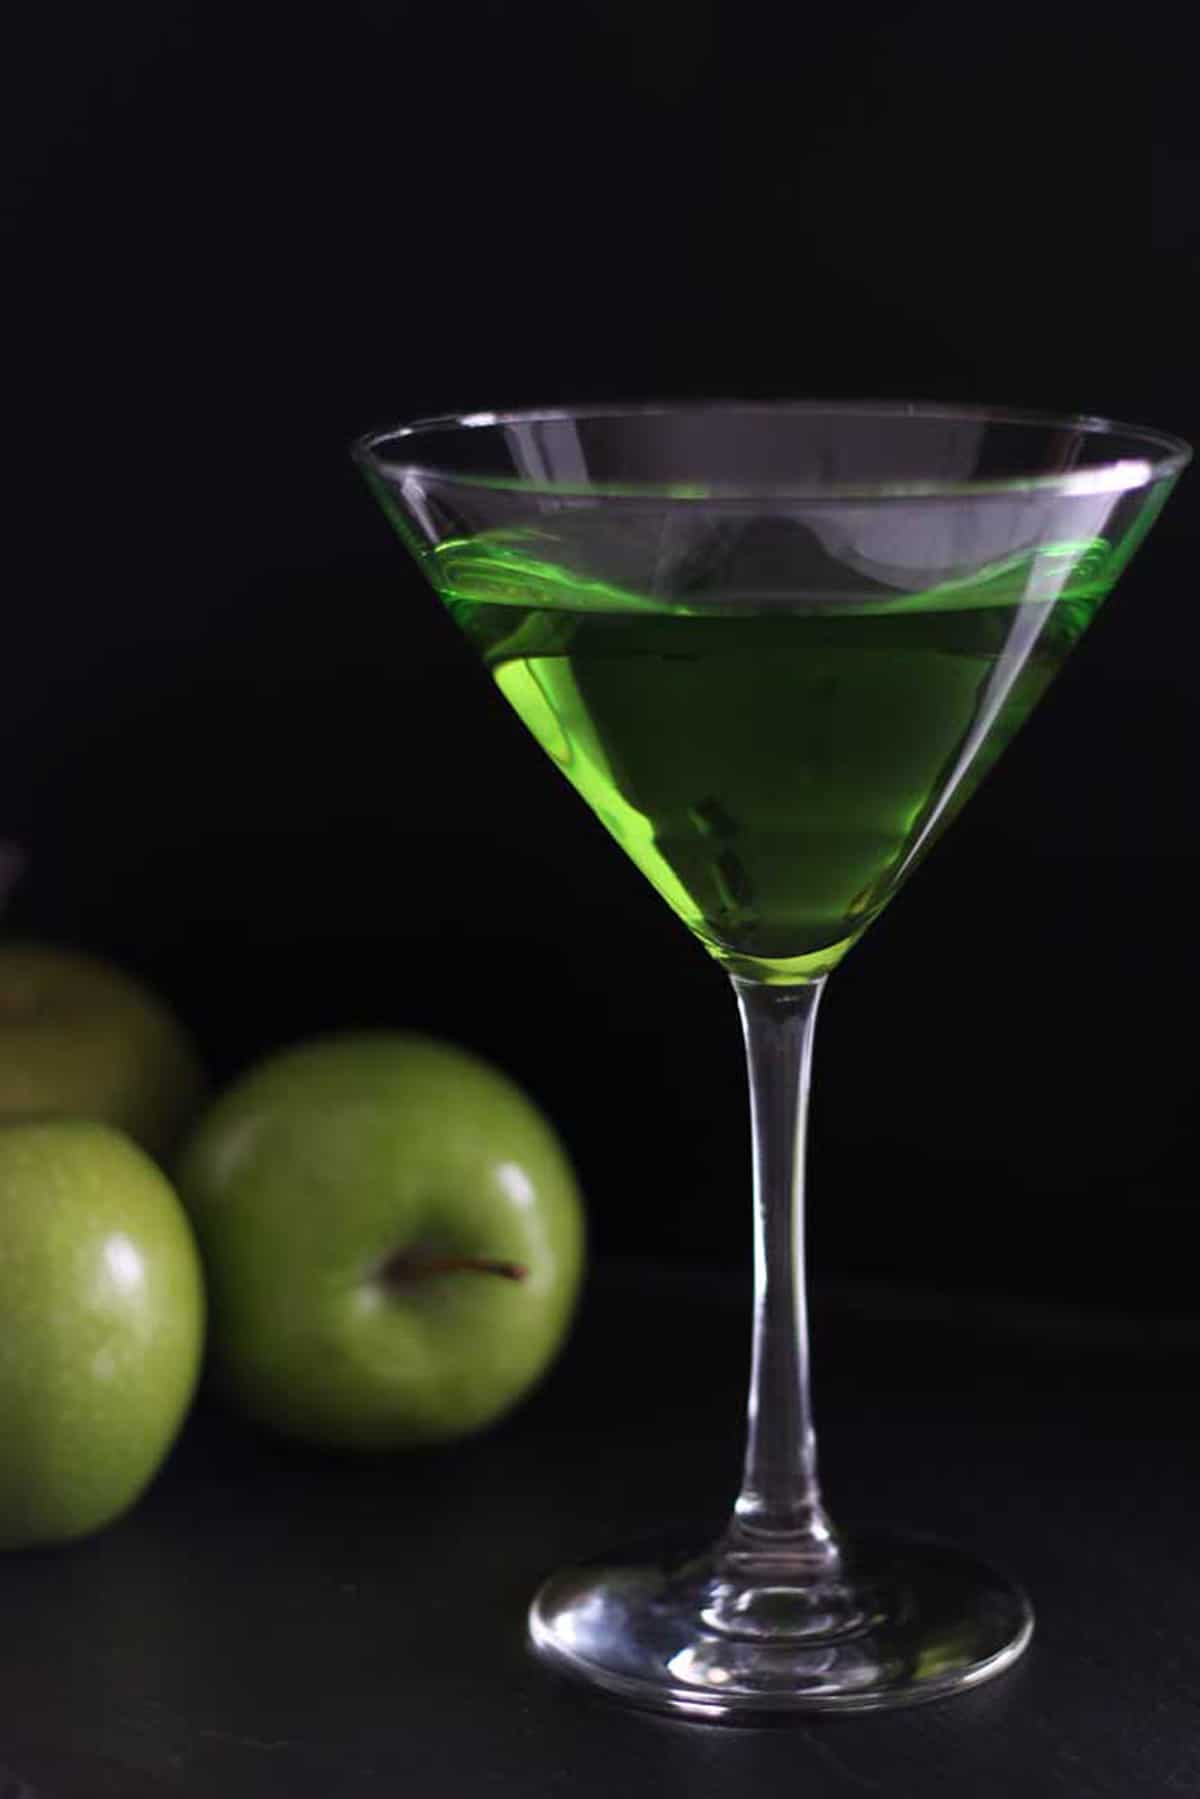 Martini glass filled with a Green Apple Martini Cocktail sitting on a black table, three green apples sitting on black table.